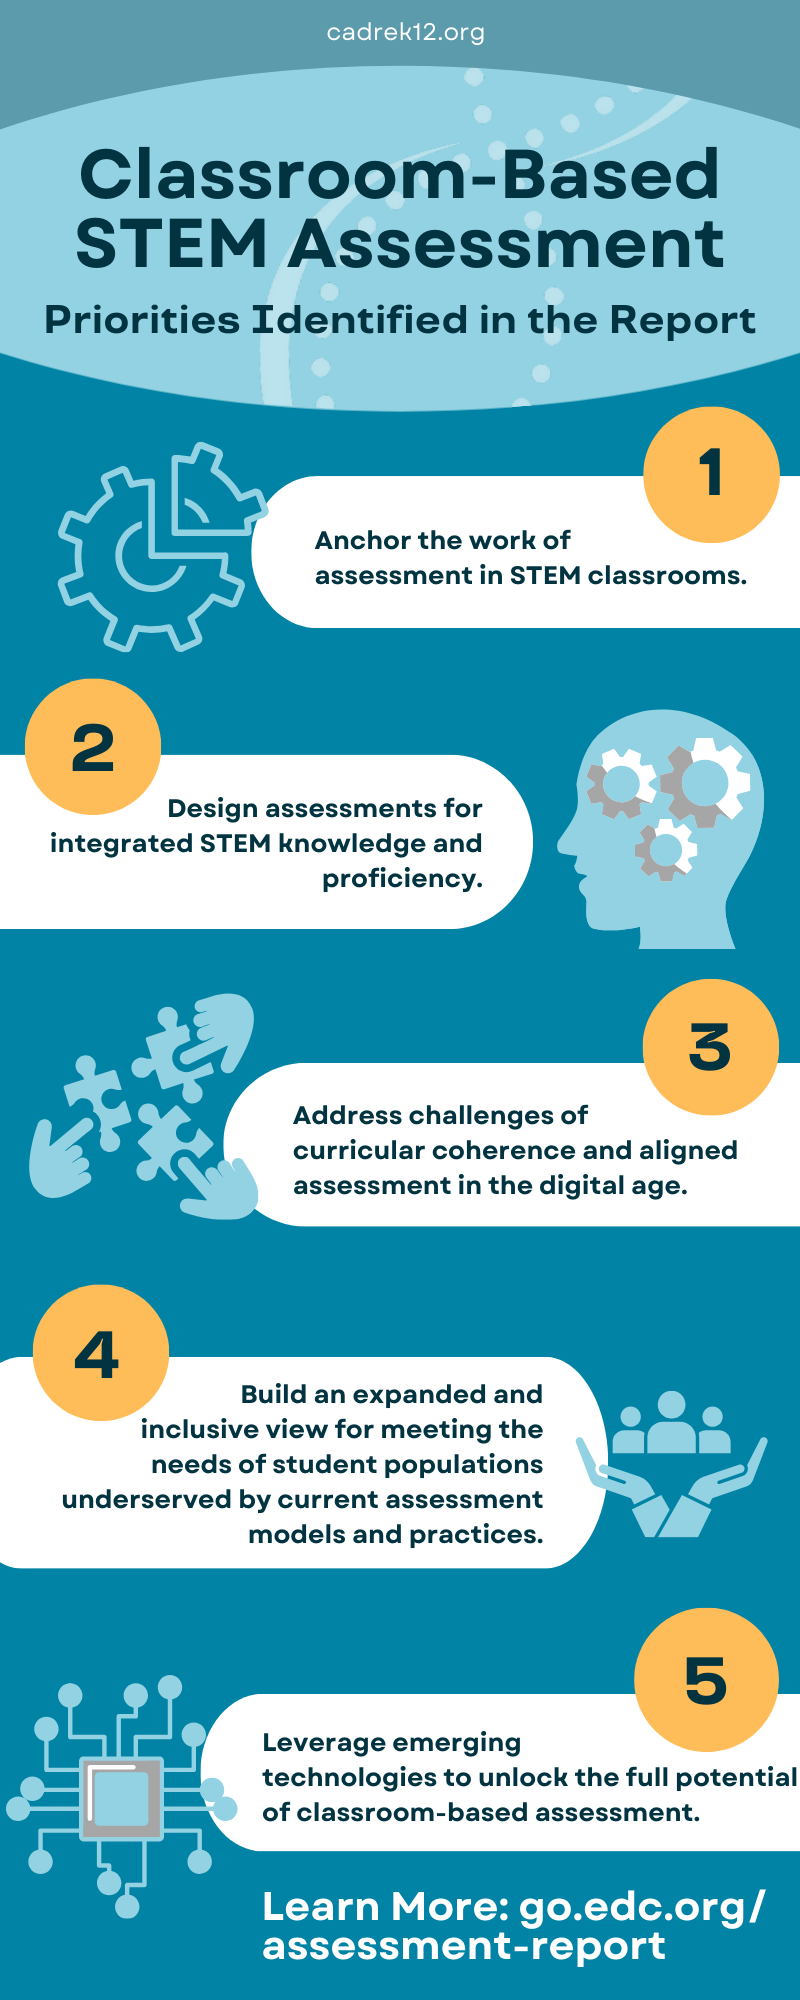 Assessment report infographic